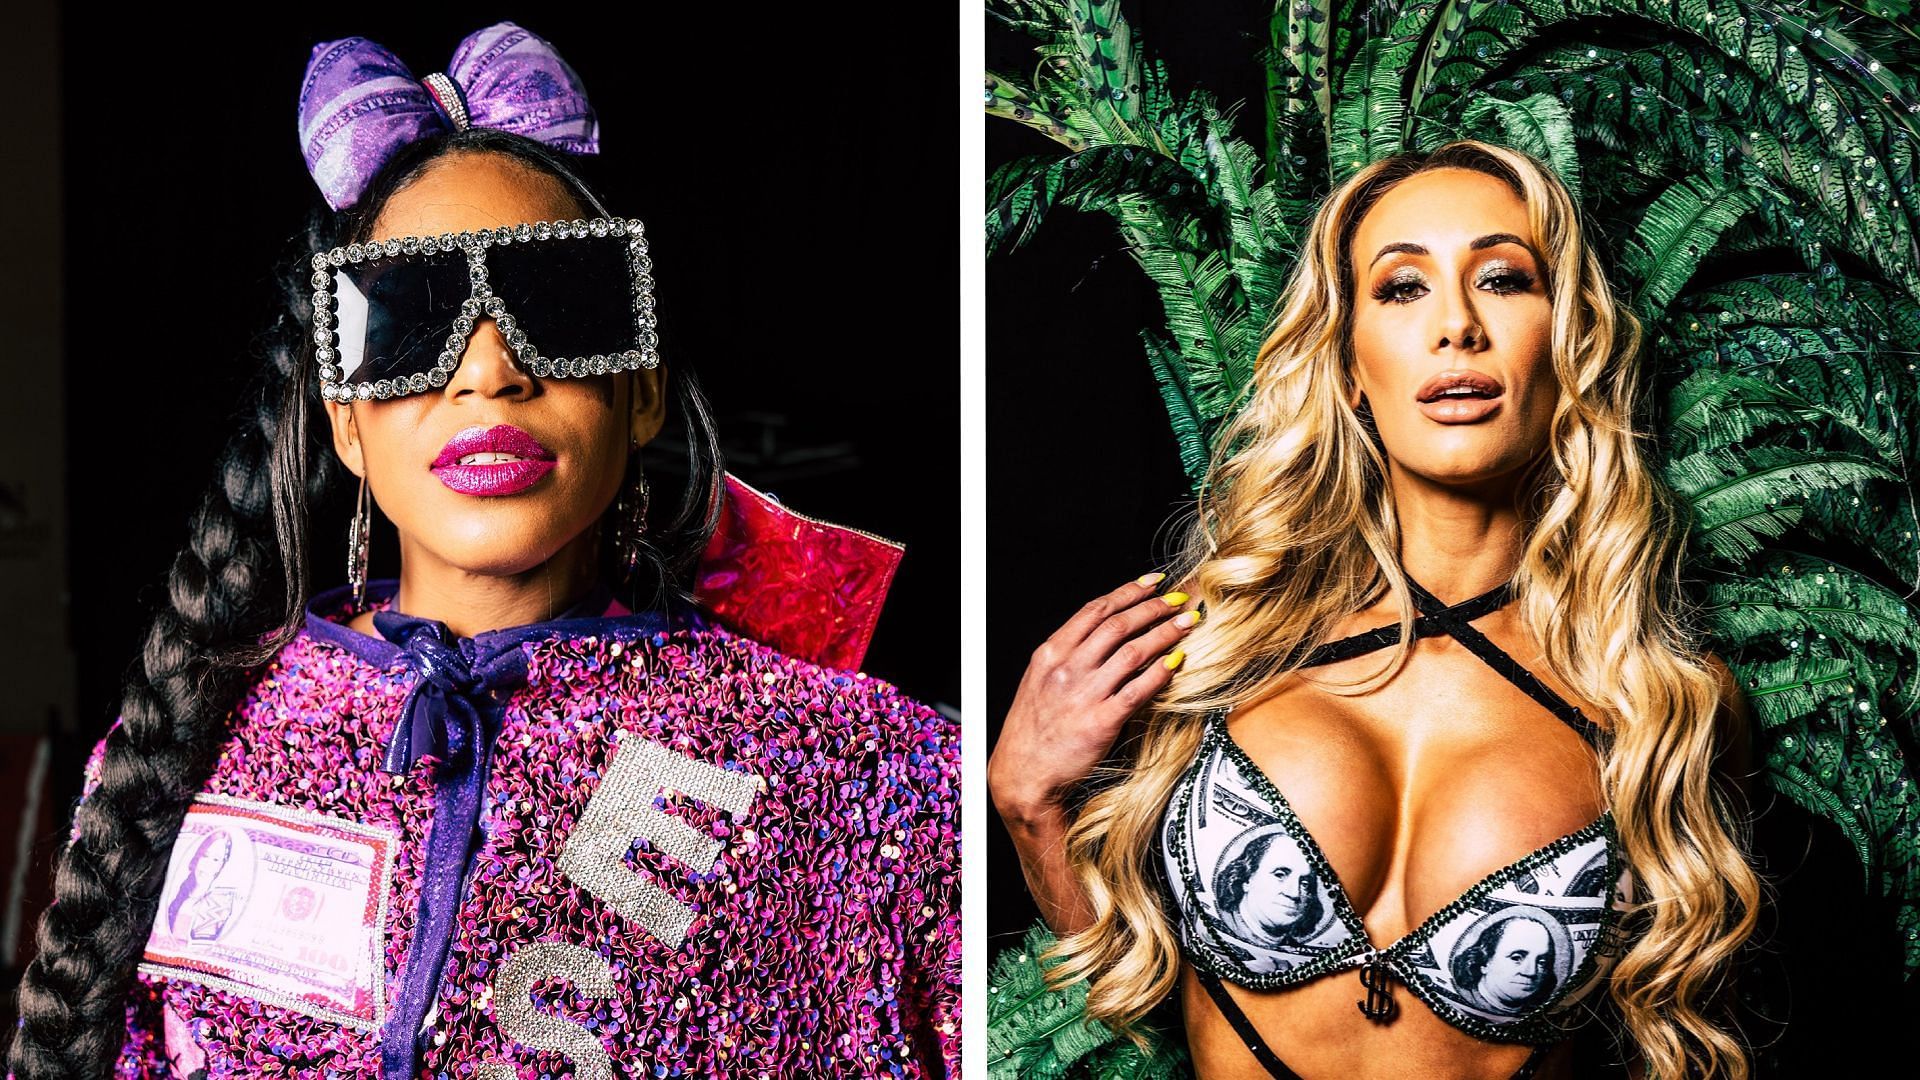 Carmella and Bianca Belair are set to go at it on WWE RAW